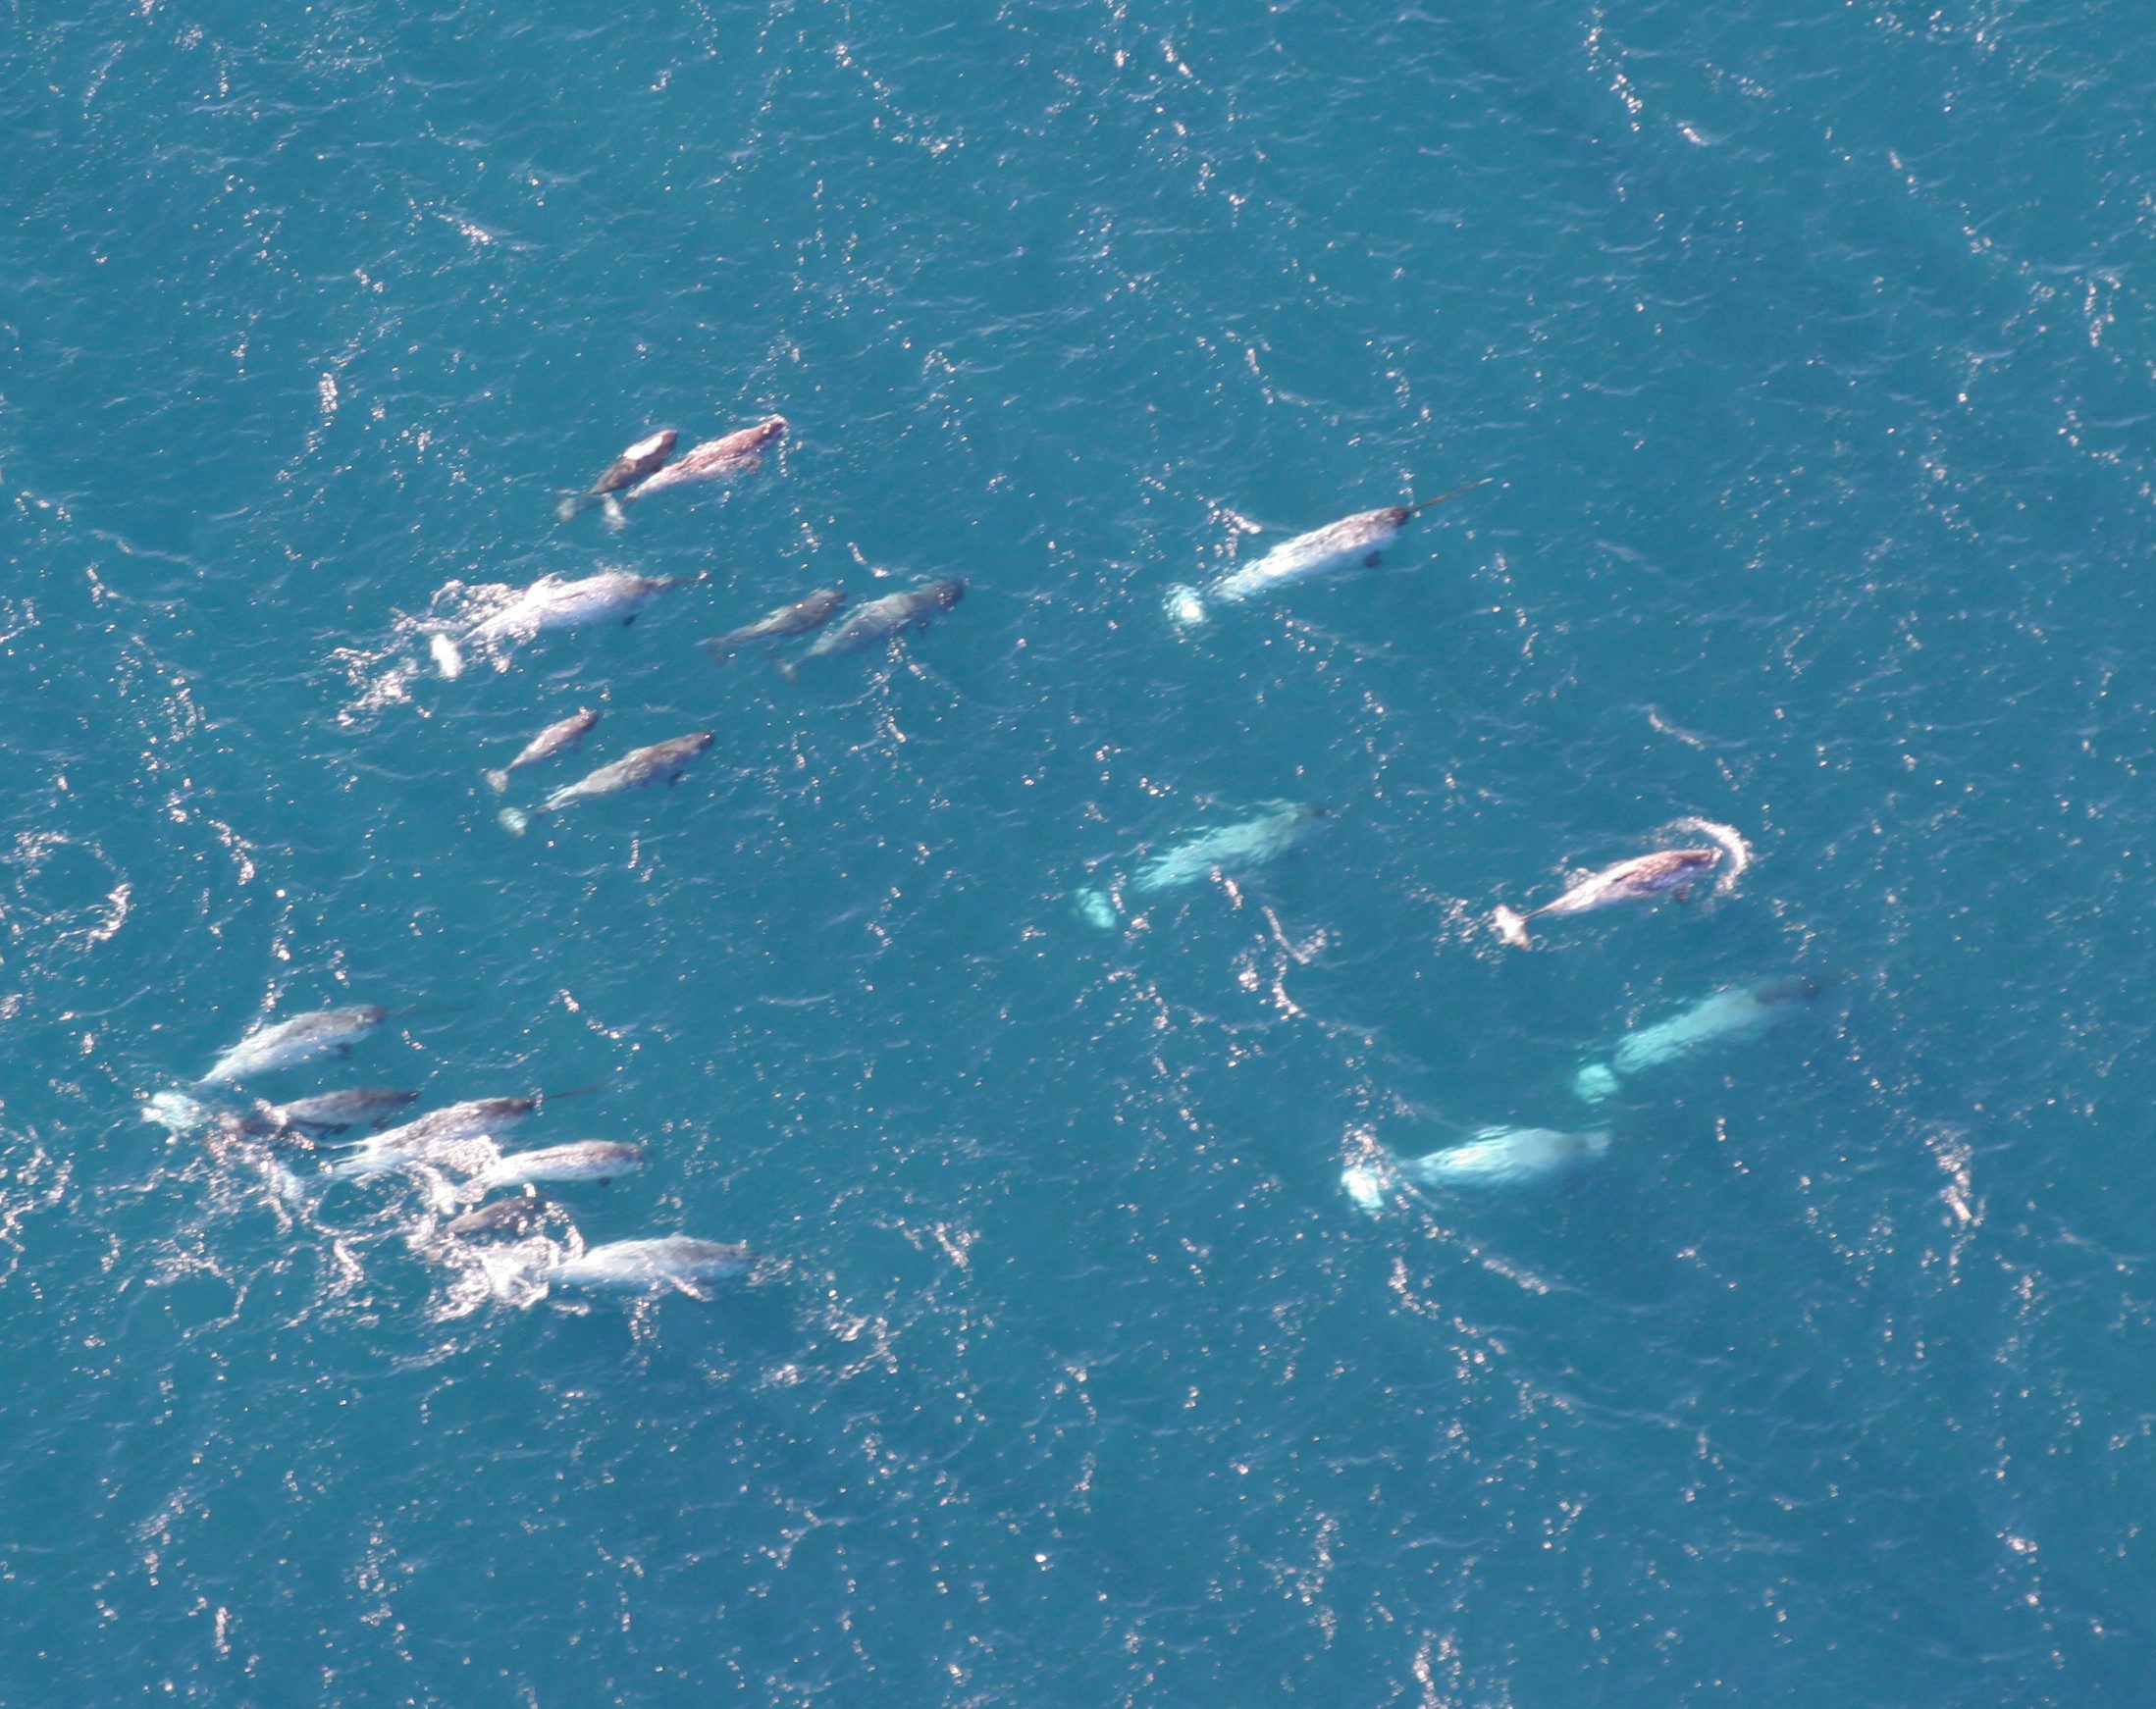 This photo released by the National Oceanic and Atmospheric Administration shows a pod of narwhals from northern Canada on Aug. 19, 2005. (Kristin Laidre/NOAA/AP)